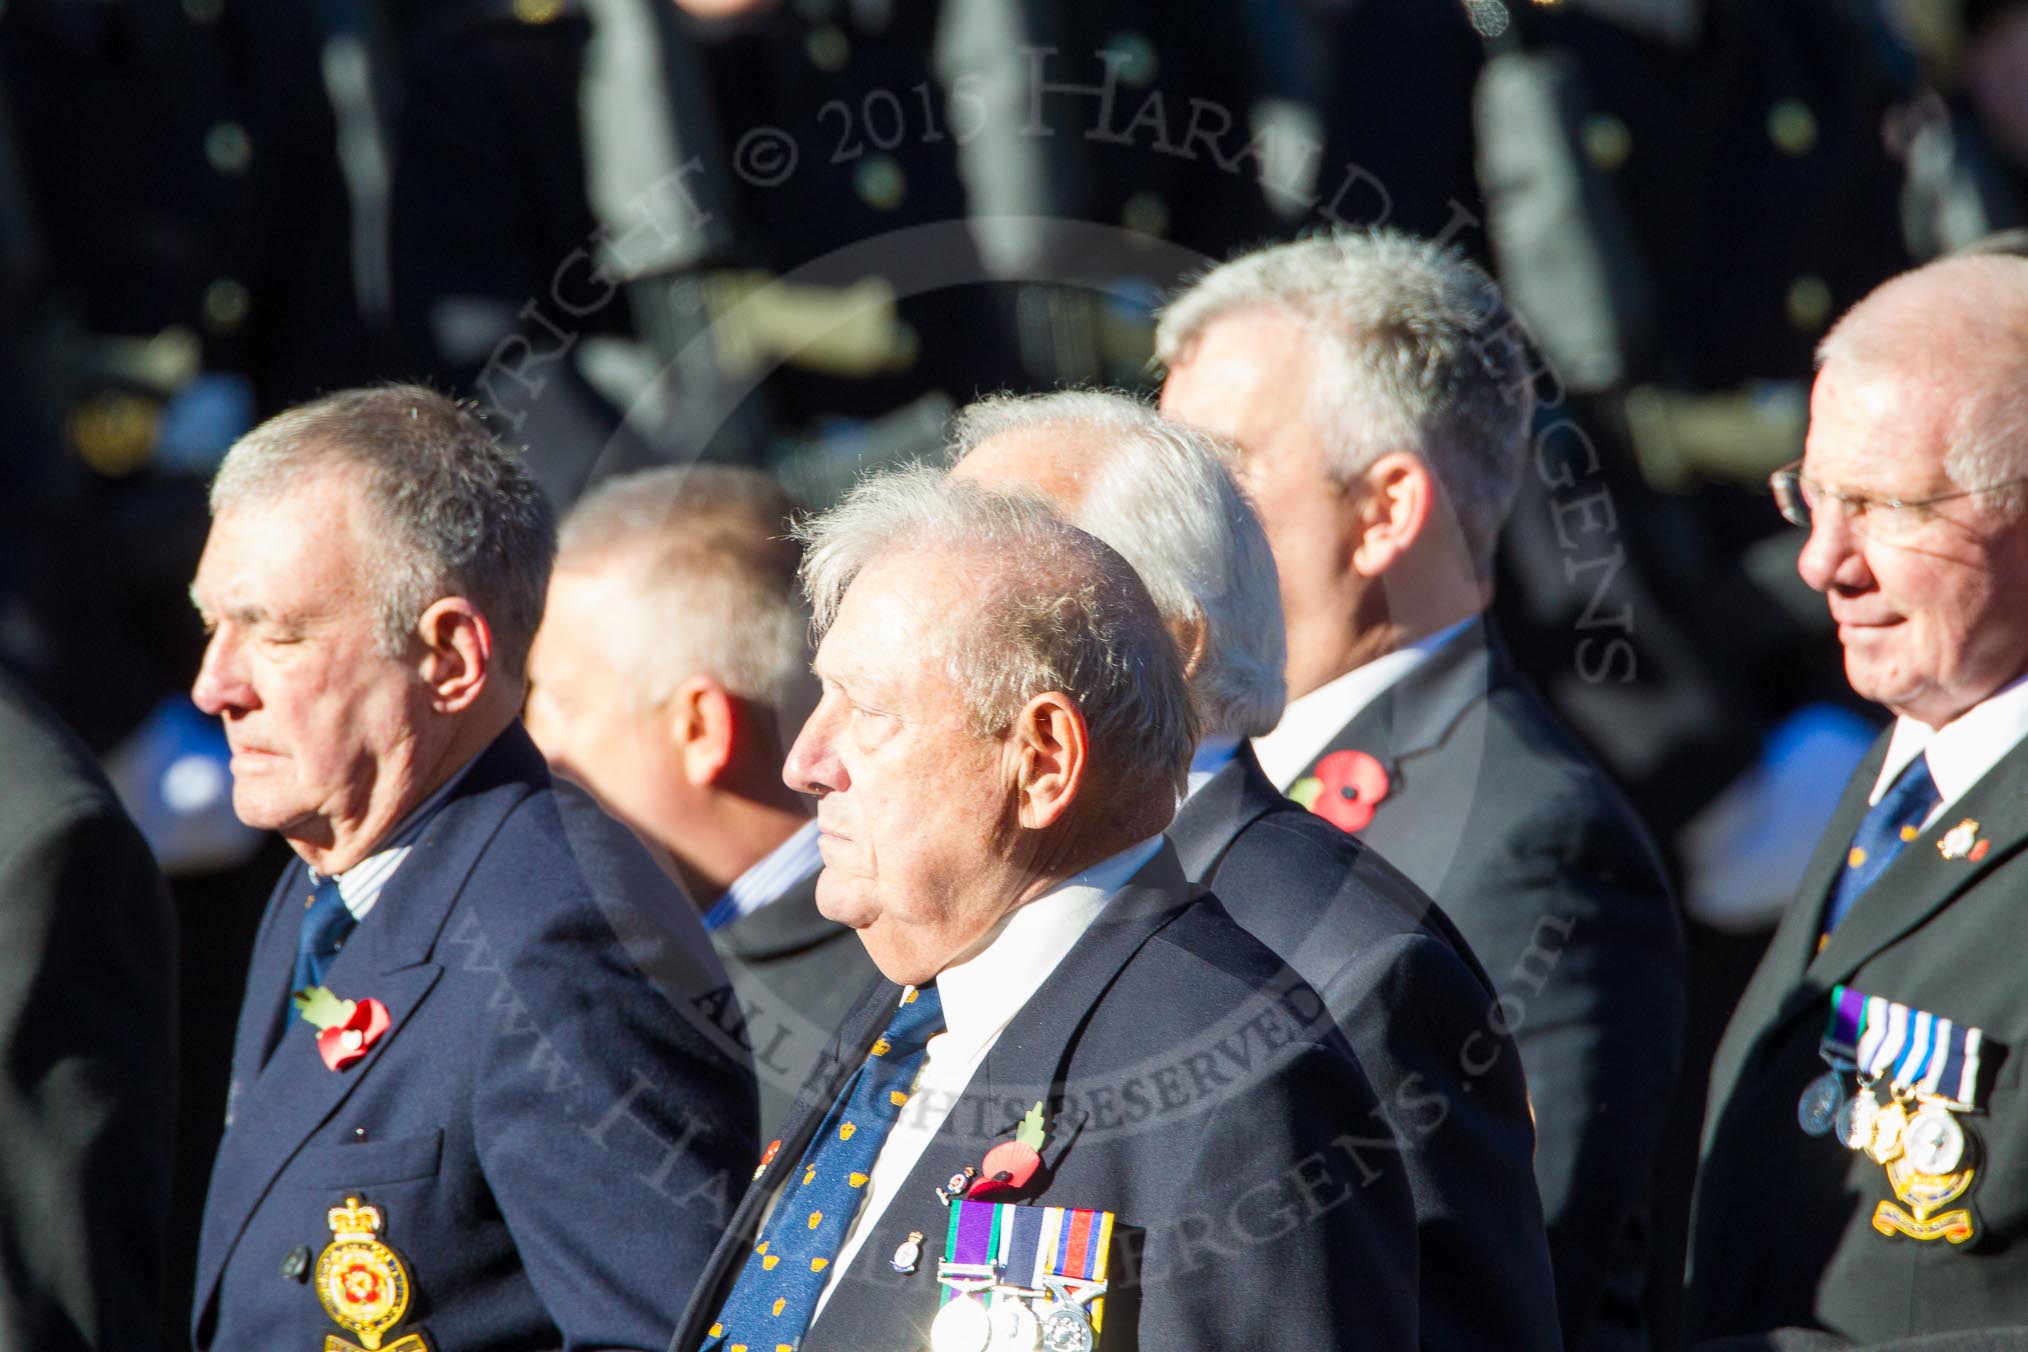 Remembrance Sunday Cenotaph March Past 2013: E40 - Association of Royal Yachtsmen..
Press stand opposite the Foreign Office building, Whitehall, London SW1,
London,
Greater London,
United Kingdom,
on 10 November 2013 at 11:49, image #697